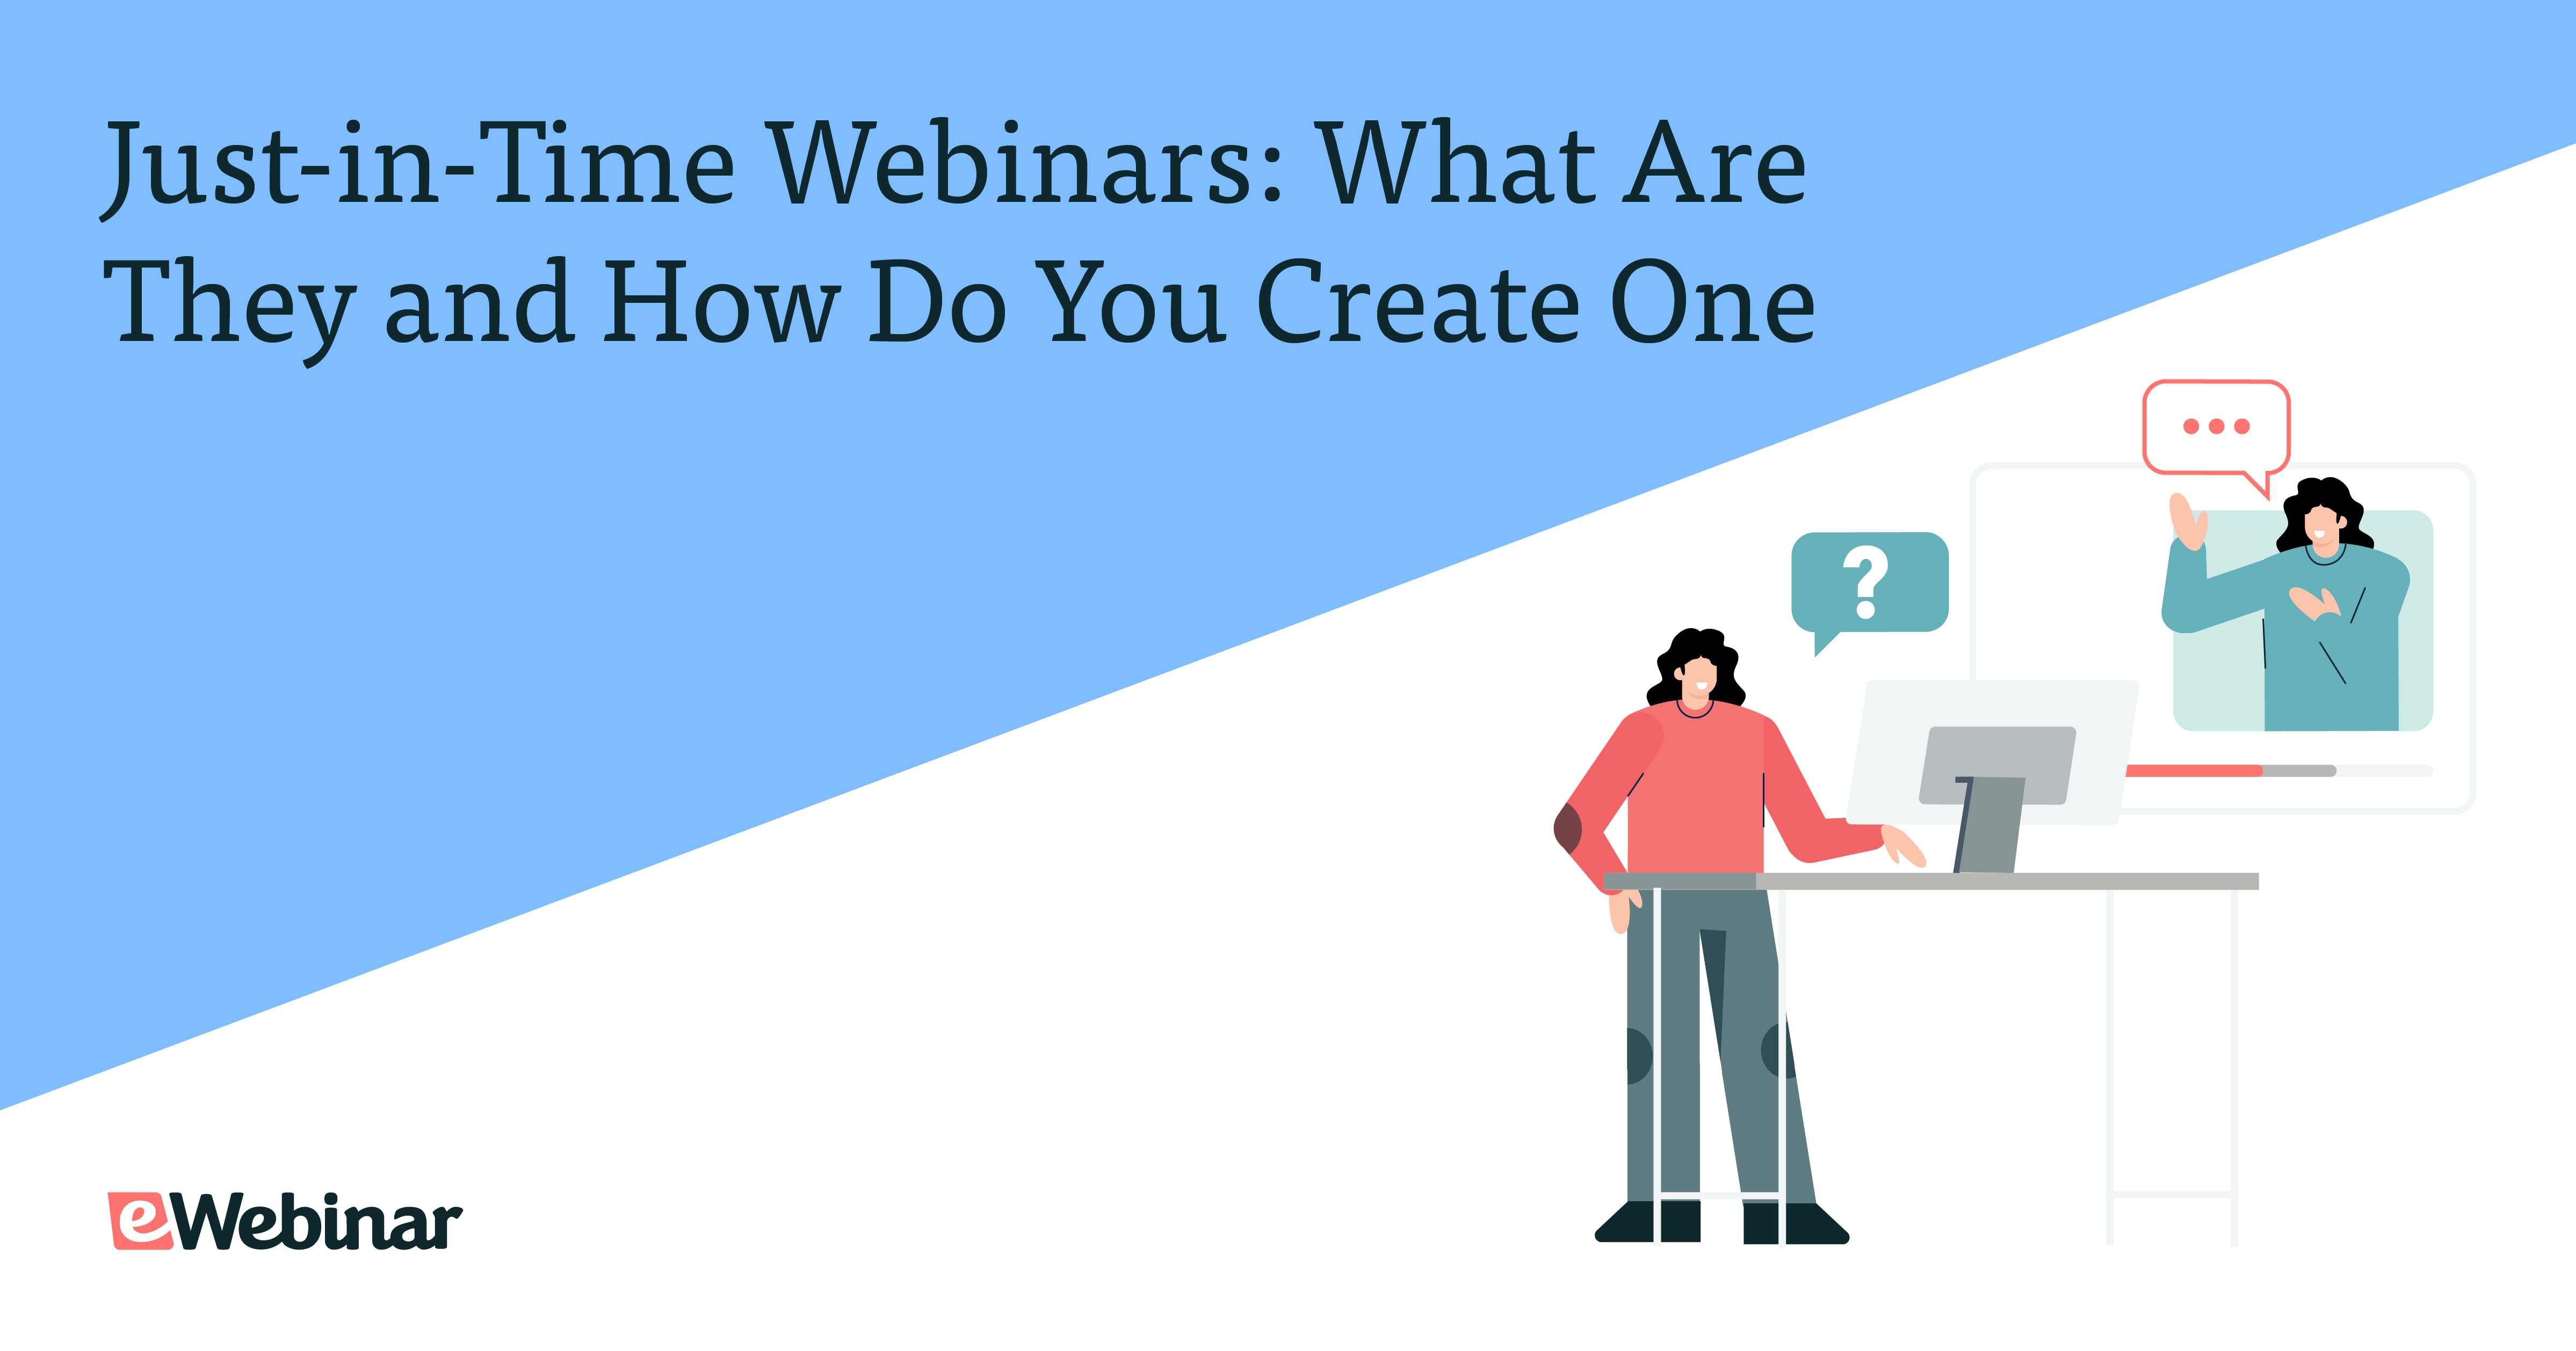 Just-in-Time Webinars: What Are They and How Do You Create One?